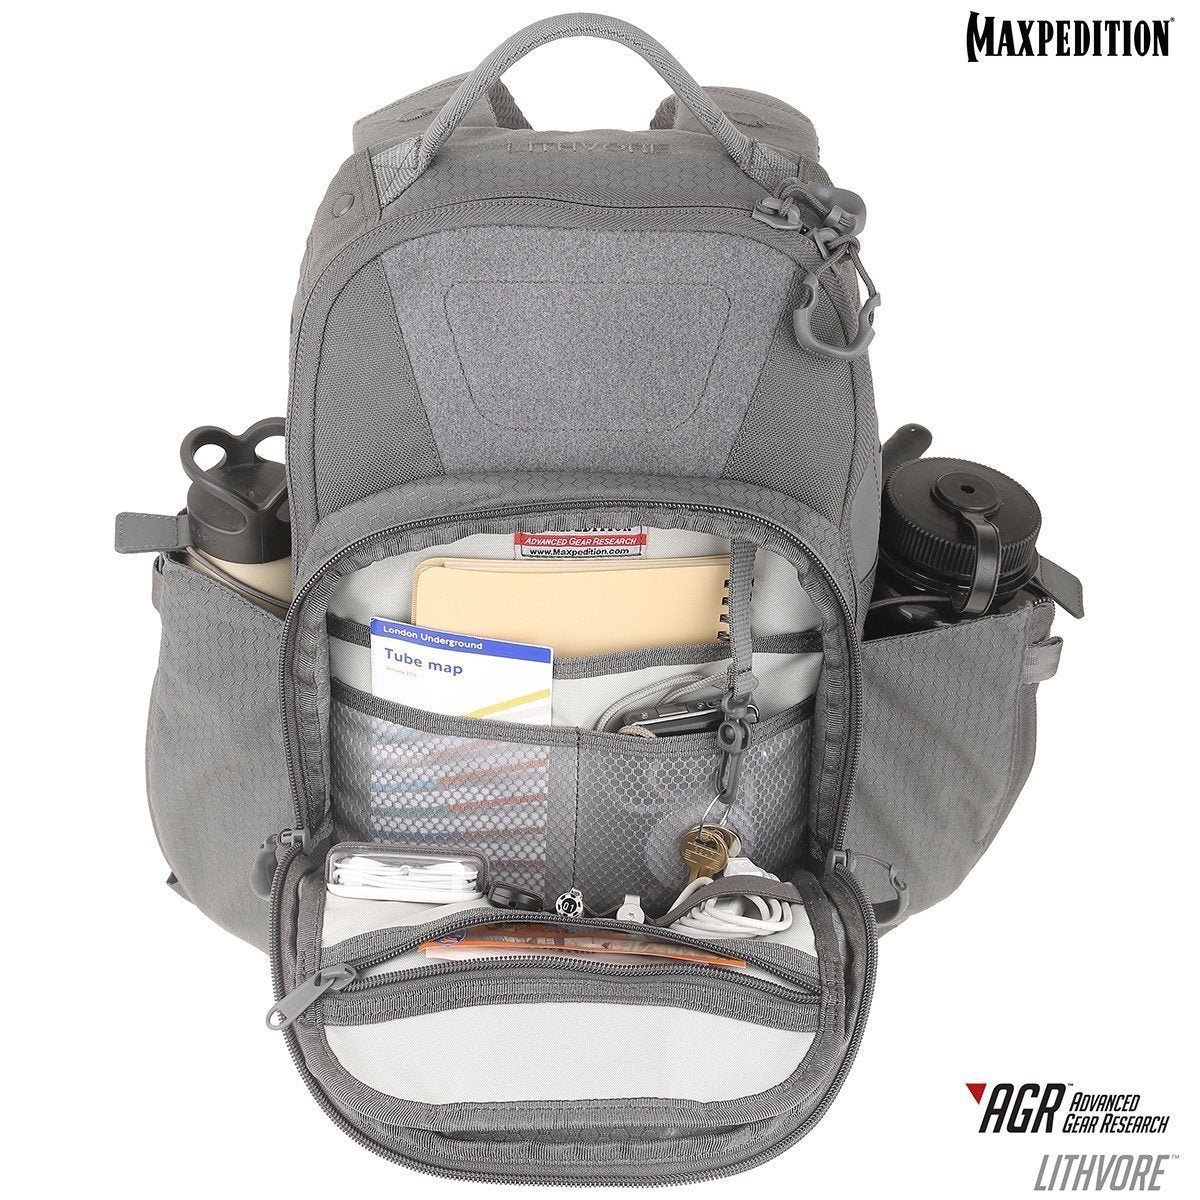 Lithvore™ Everyday Backpack | Maxpedition  Tactical Gear